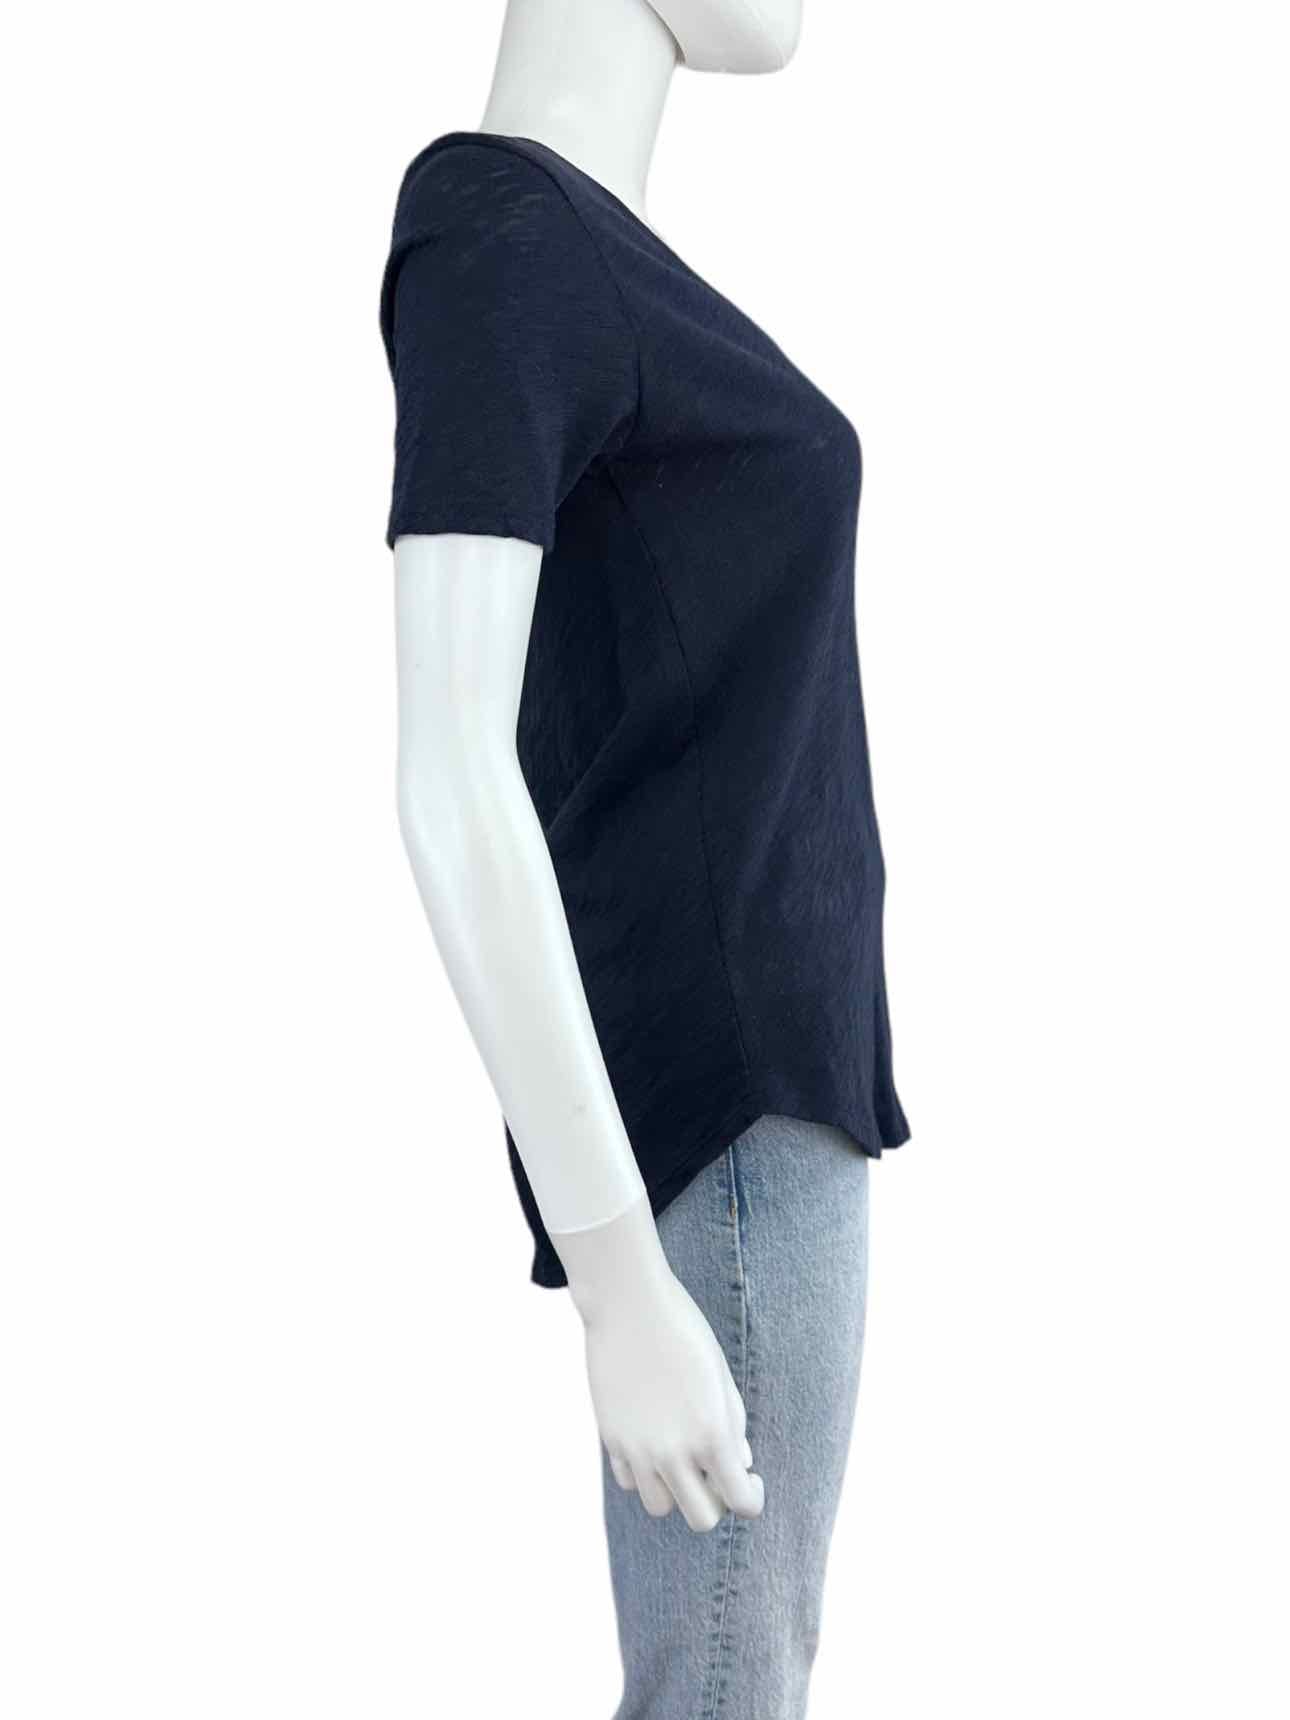 ATM NWT Navy 100% Cotton Knit Top Size S